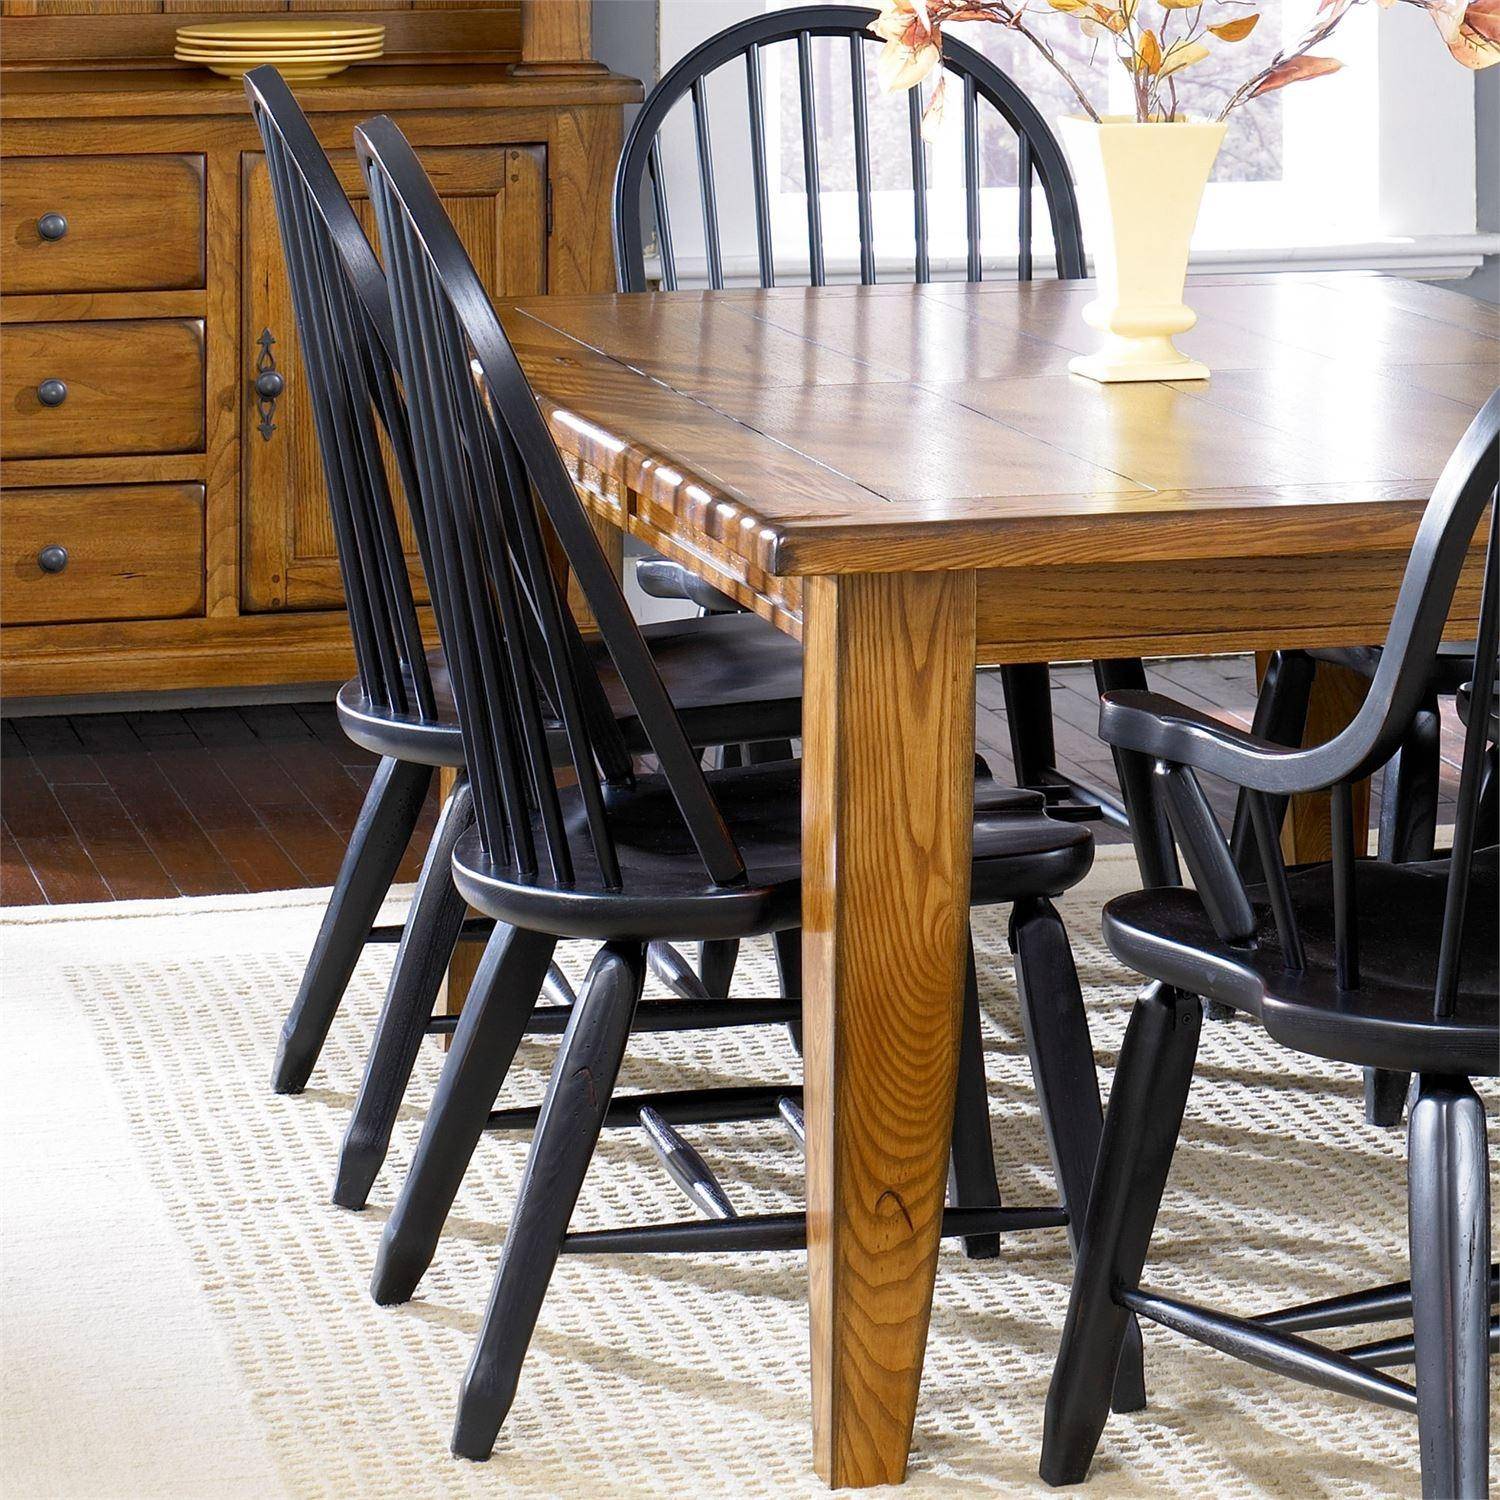 Black Rustic Oak Finish Dining Side Chair, (Set of 2)